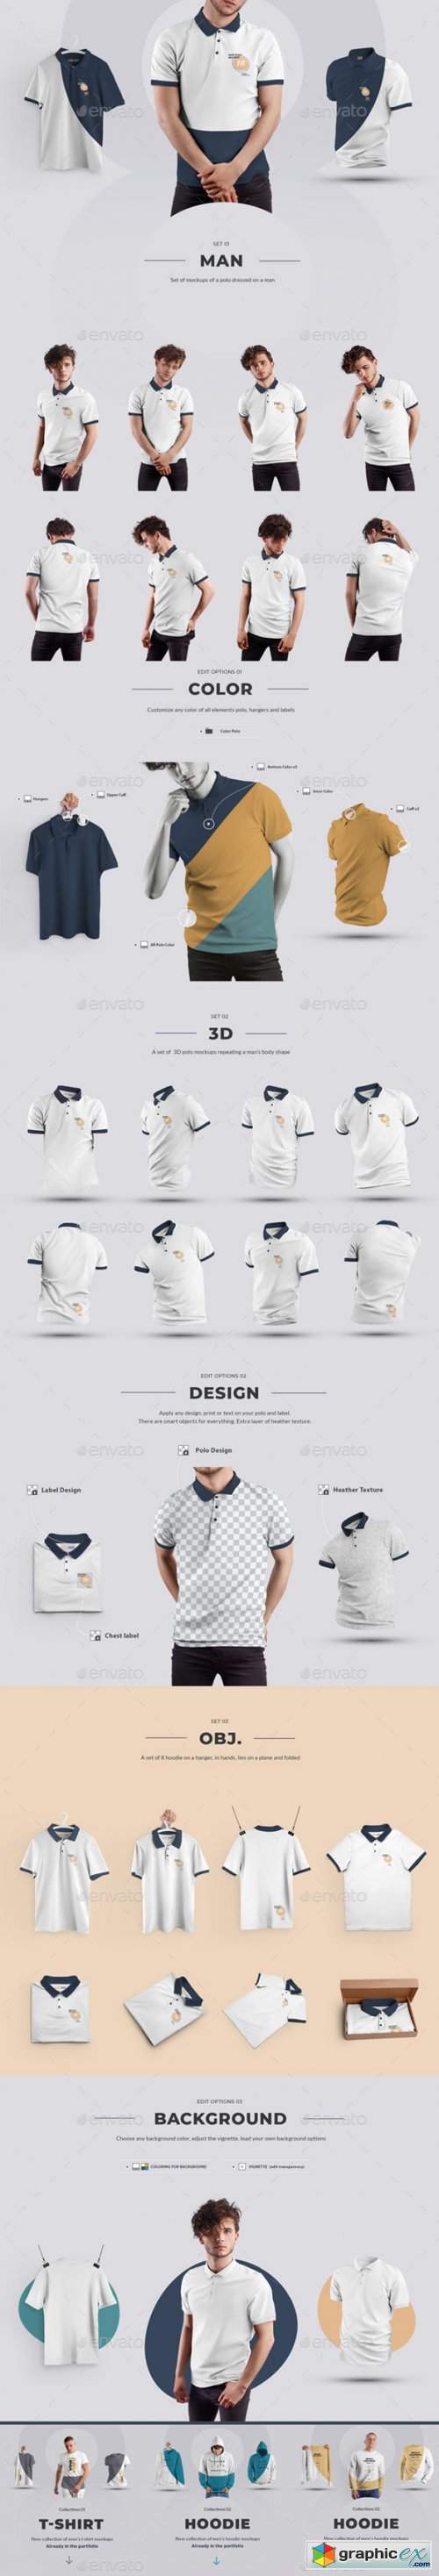 24 Polo Men Mockup - Man/3D/Objects ( Collection #4 )